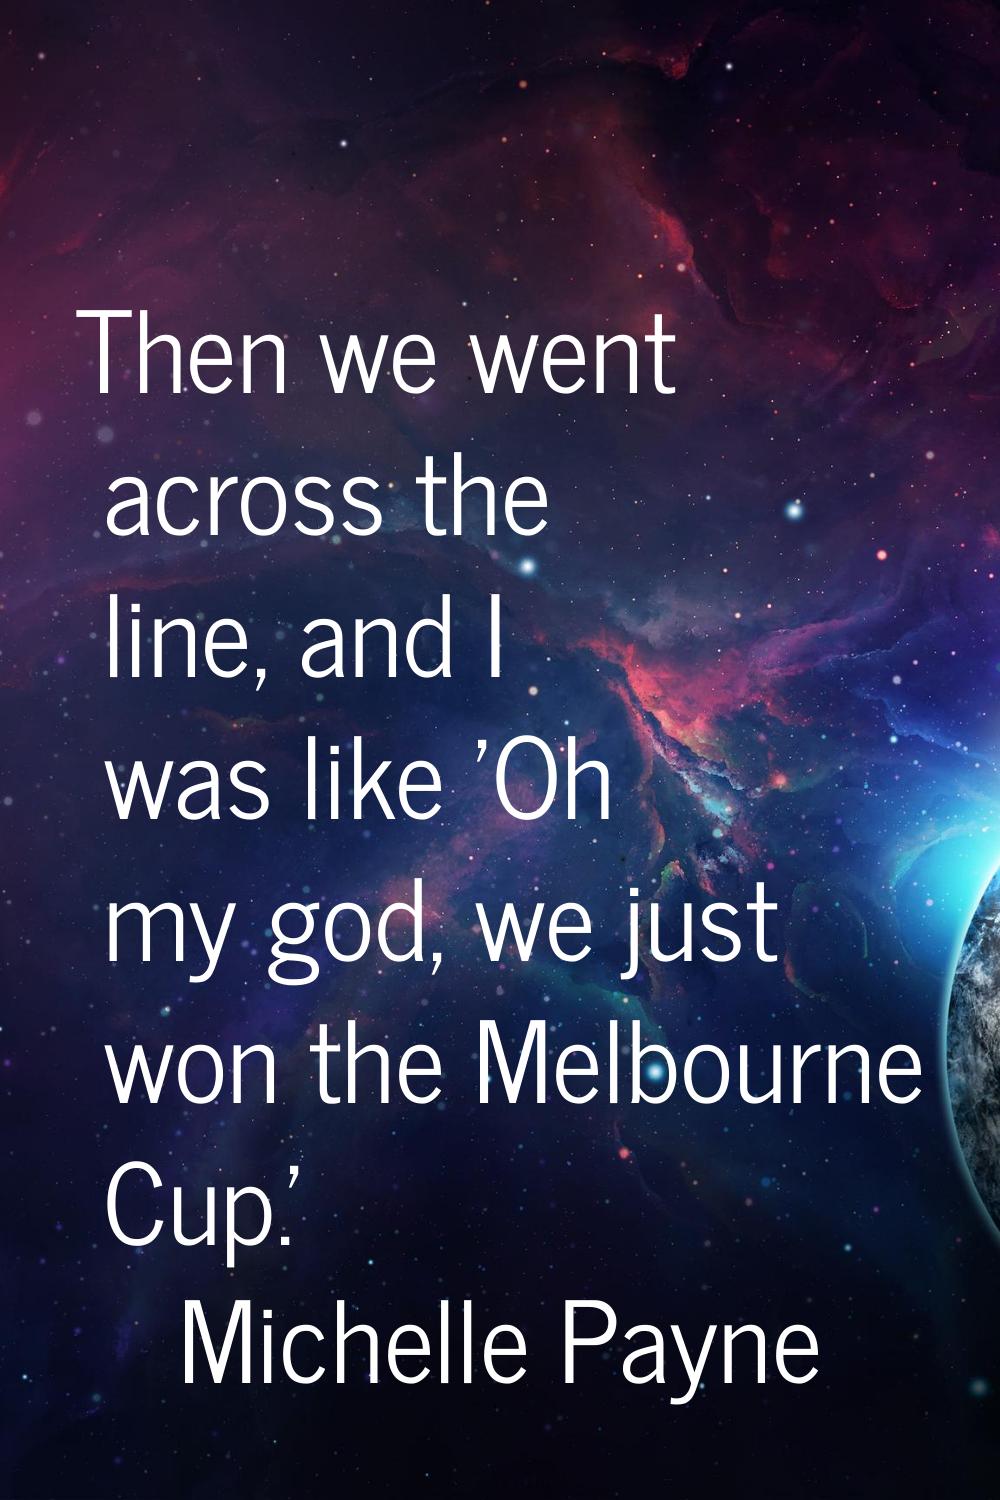 Then we went across the line, and I was like 'Oh my god, we just won the Melbourne Cup.'